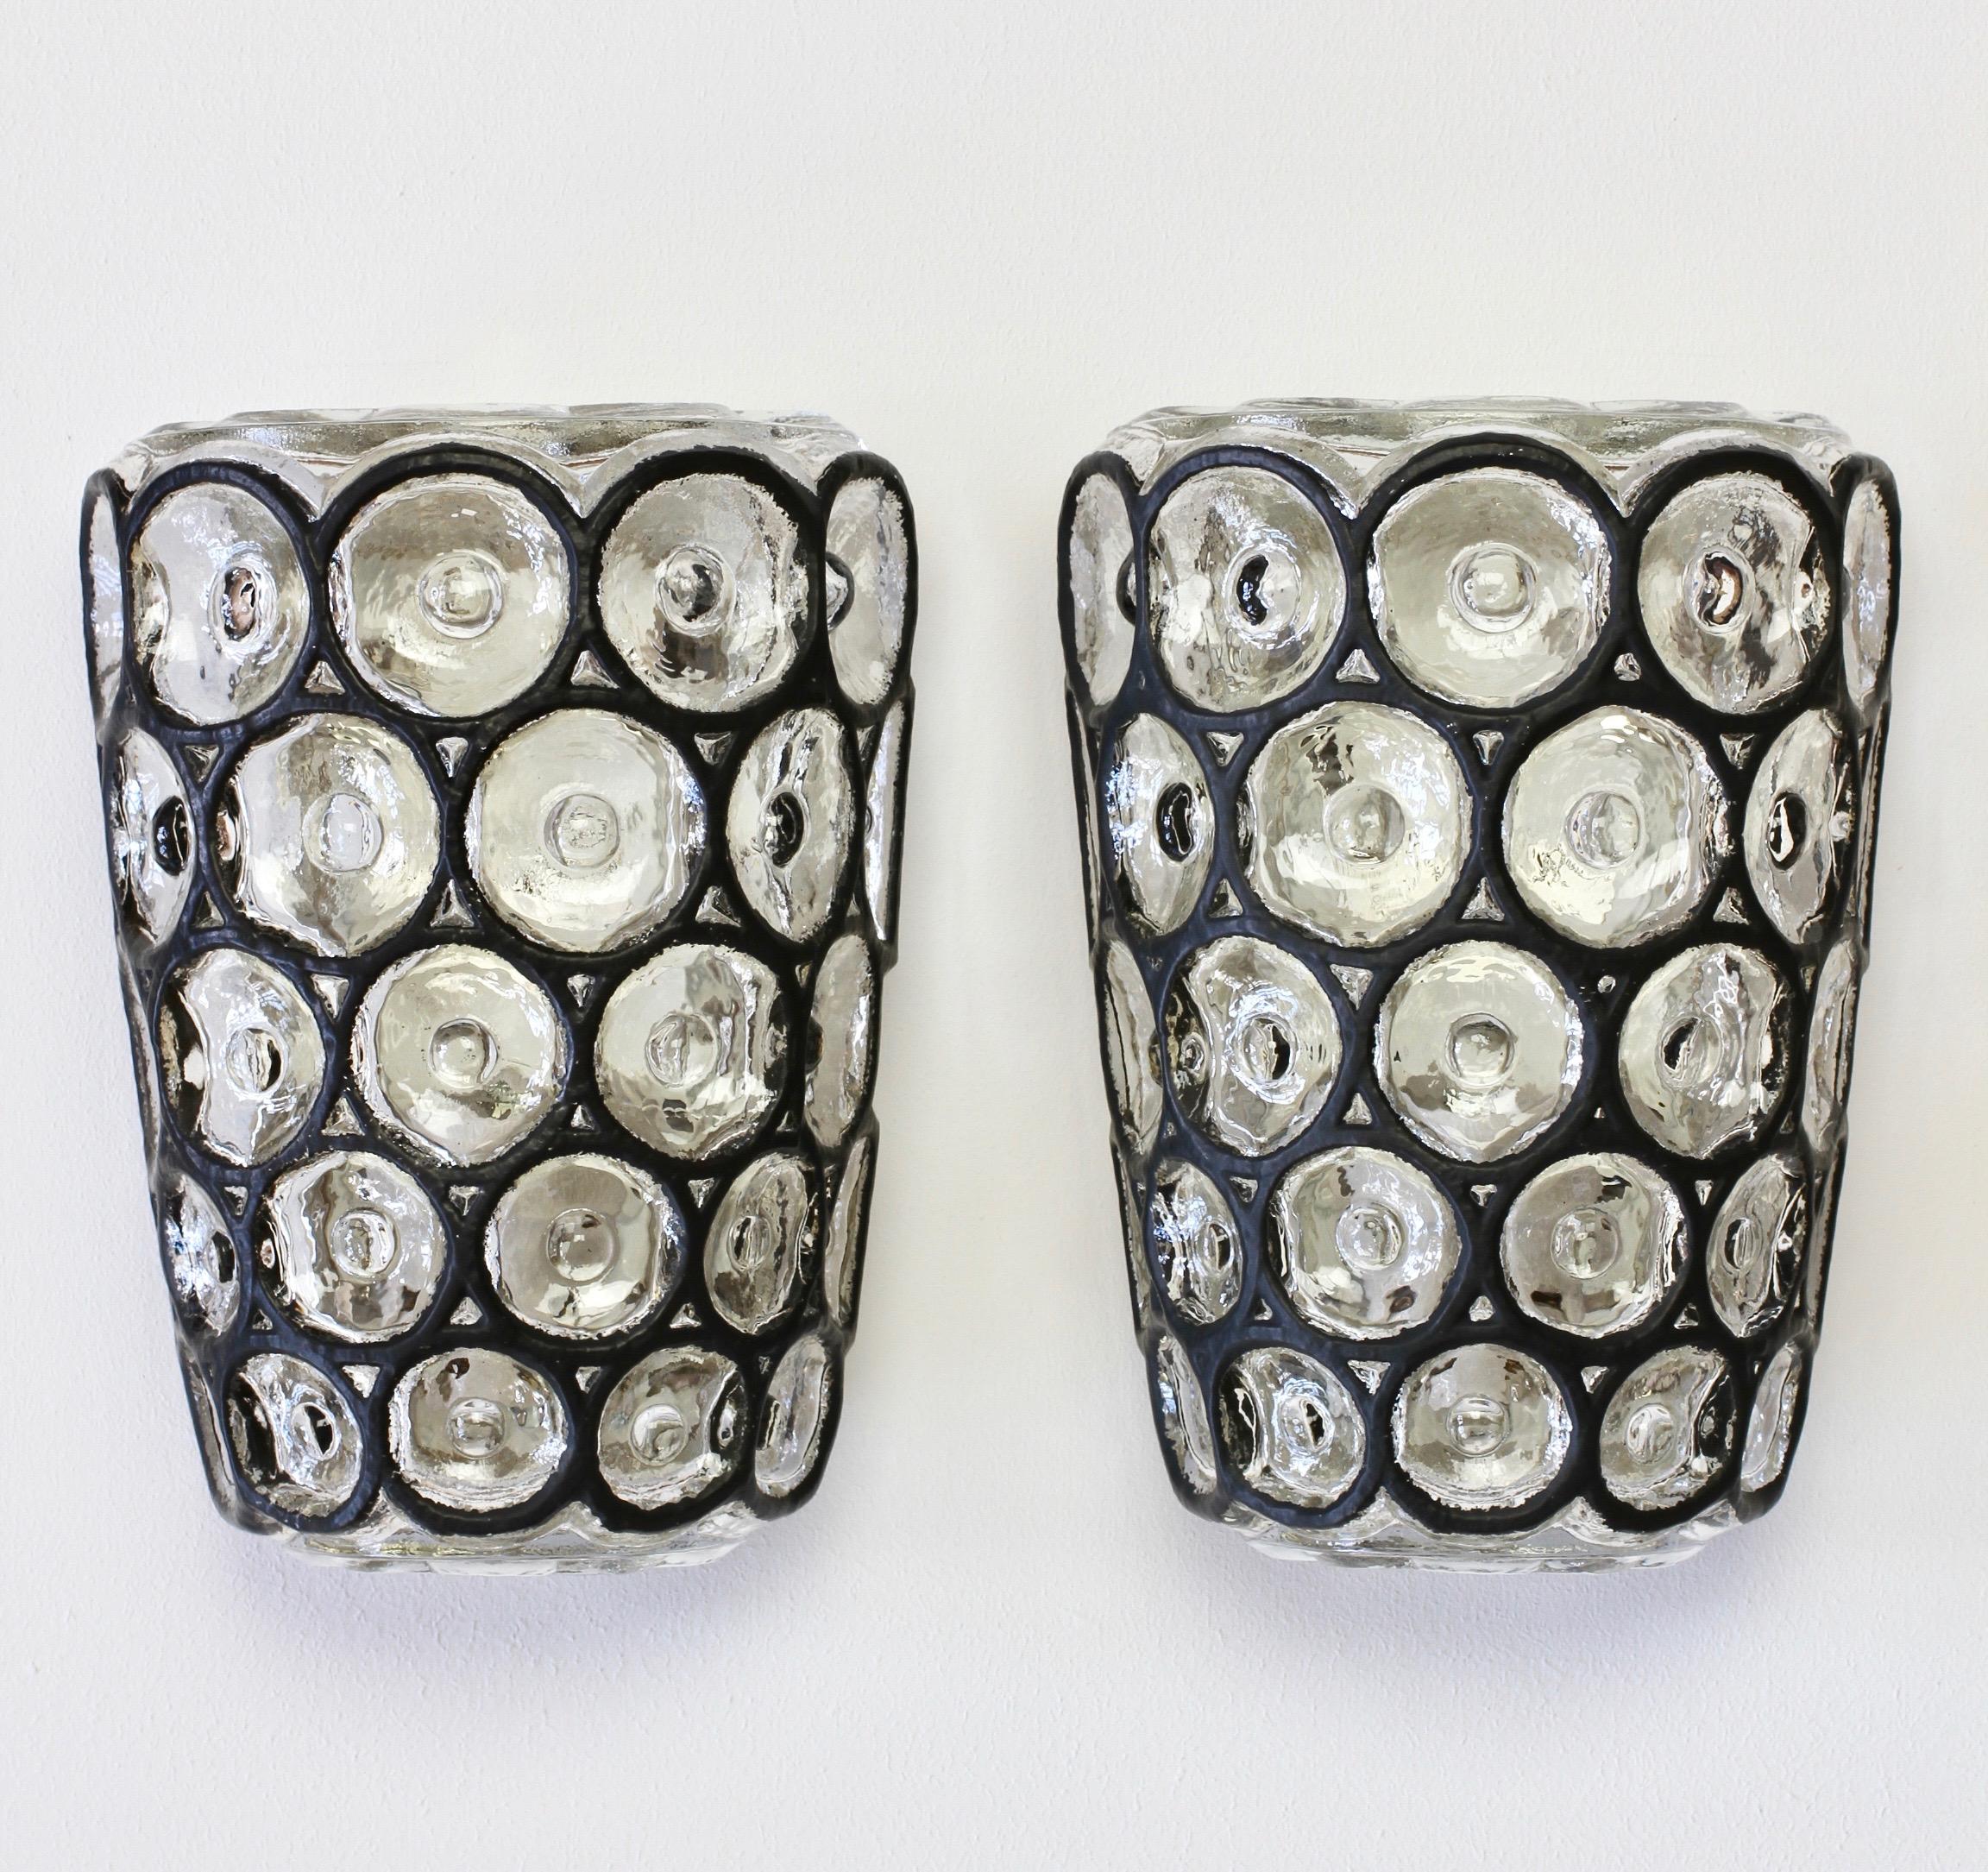 Mid-Century Modern rare pair of German made lantern style flush mount wall light fixtures or sconces by Glashütte Limburg, circa 1960. They can be wall-mounted and directly wired or used in conjunction with pull switches. New pull cords can be